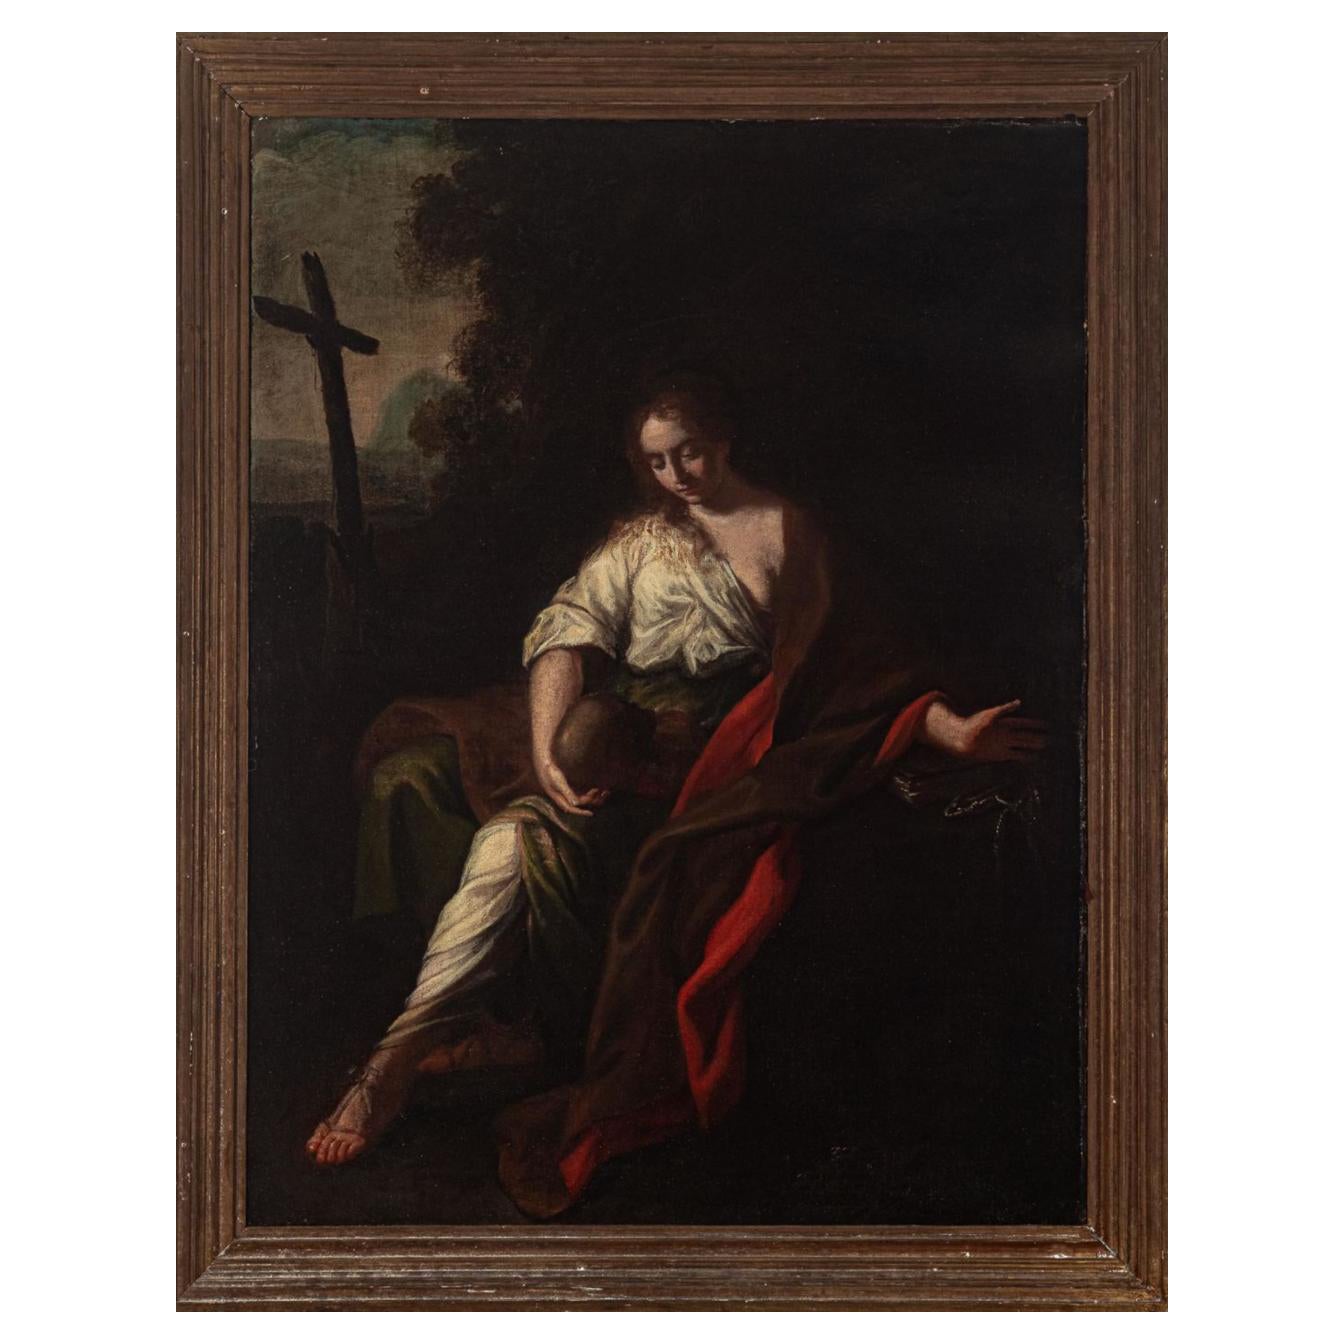 Naples School of the 17th Century Circle Andrea Vaccaro "Magdalene" For Sale